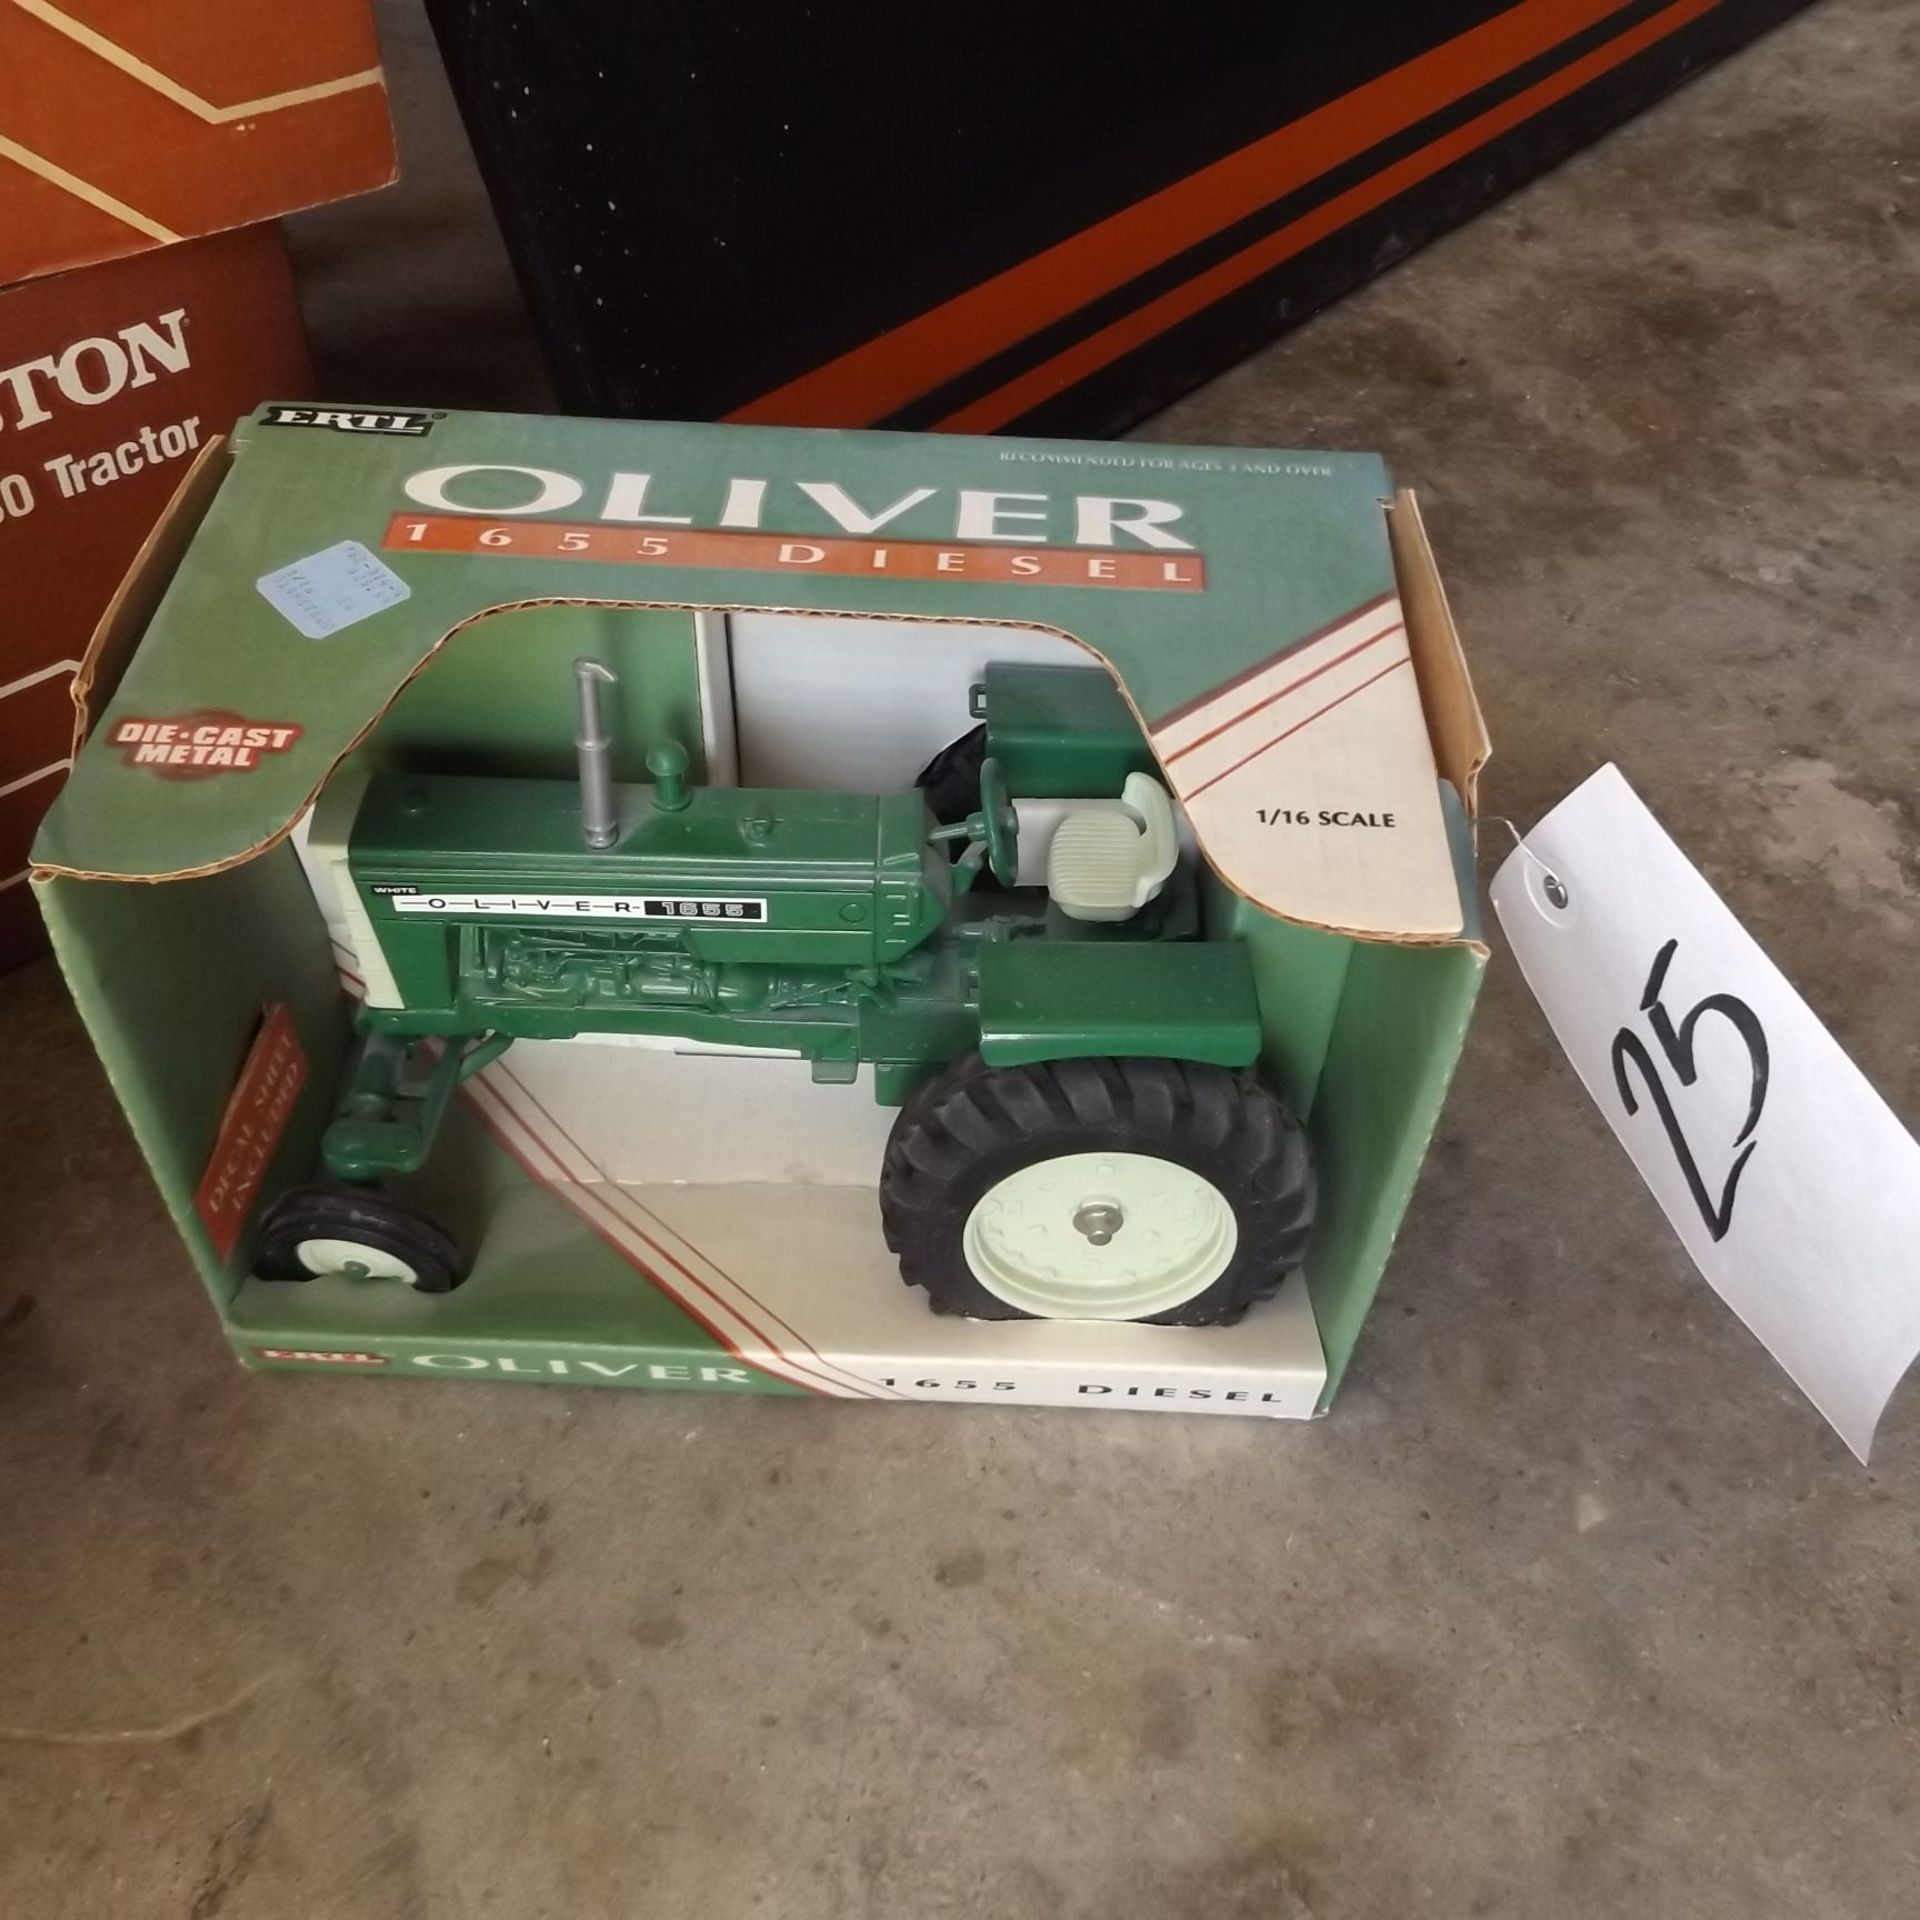 Oliver 1655 Toy Tractor 1/16